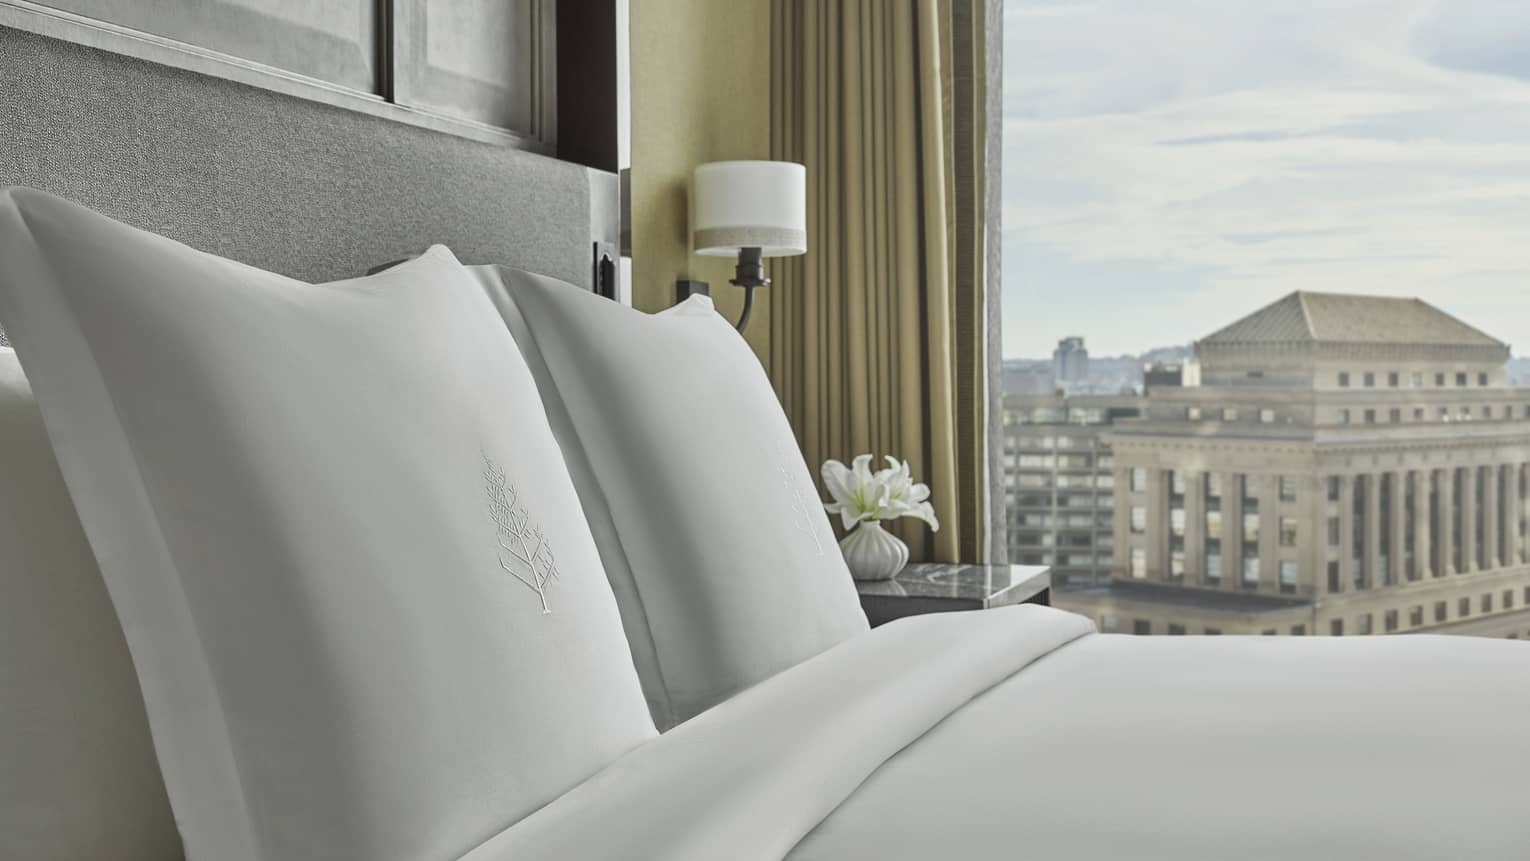 The bed is made with white linens in the Executive Suite